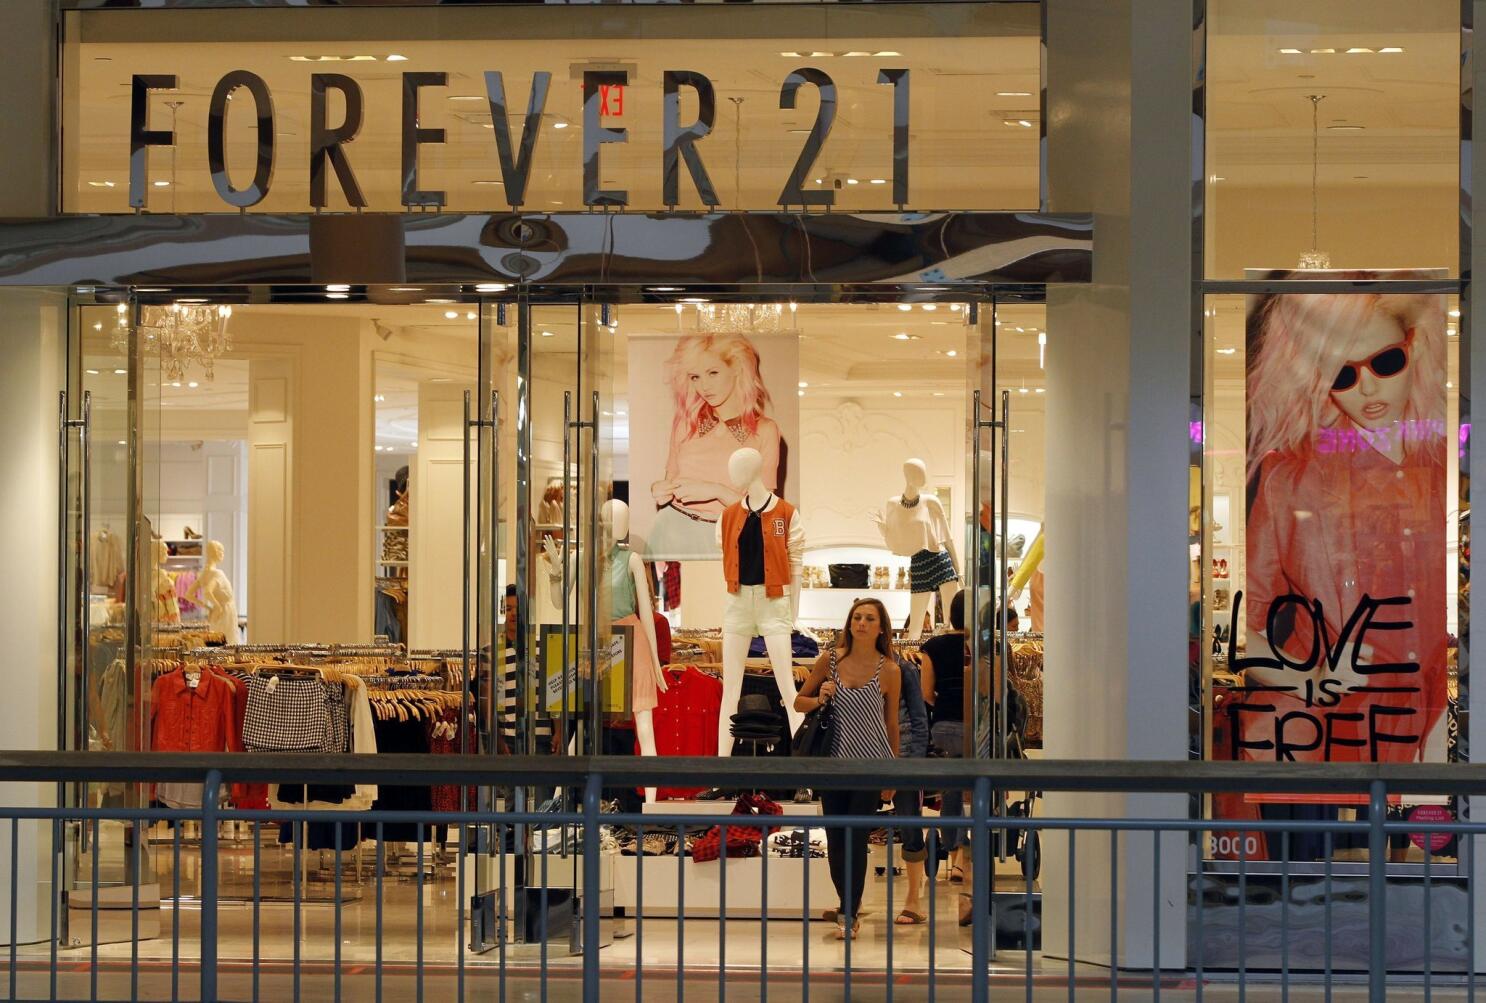 Forever 21 bankruptcy reflects teens' new shopping behavior